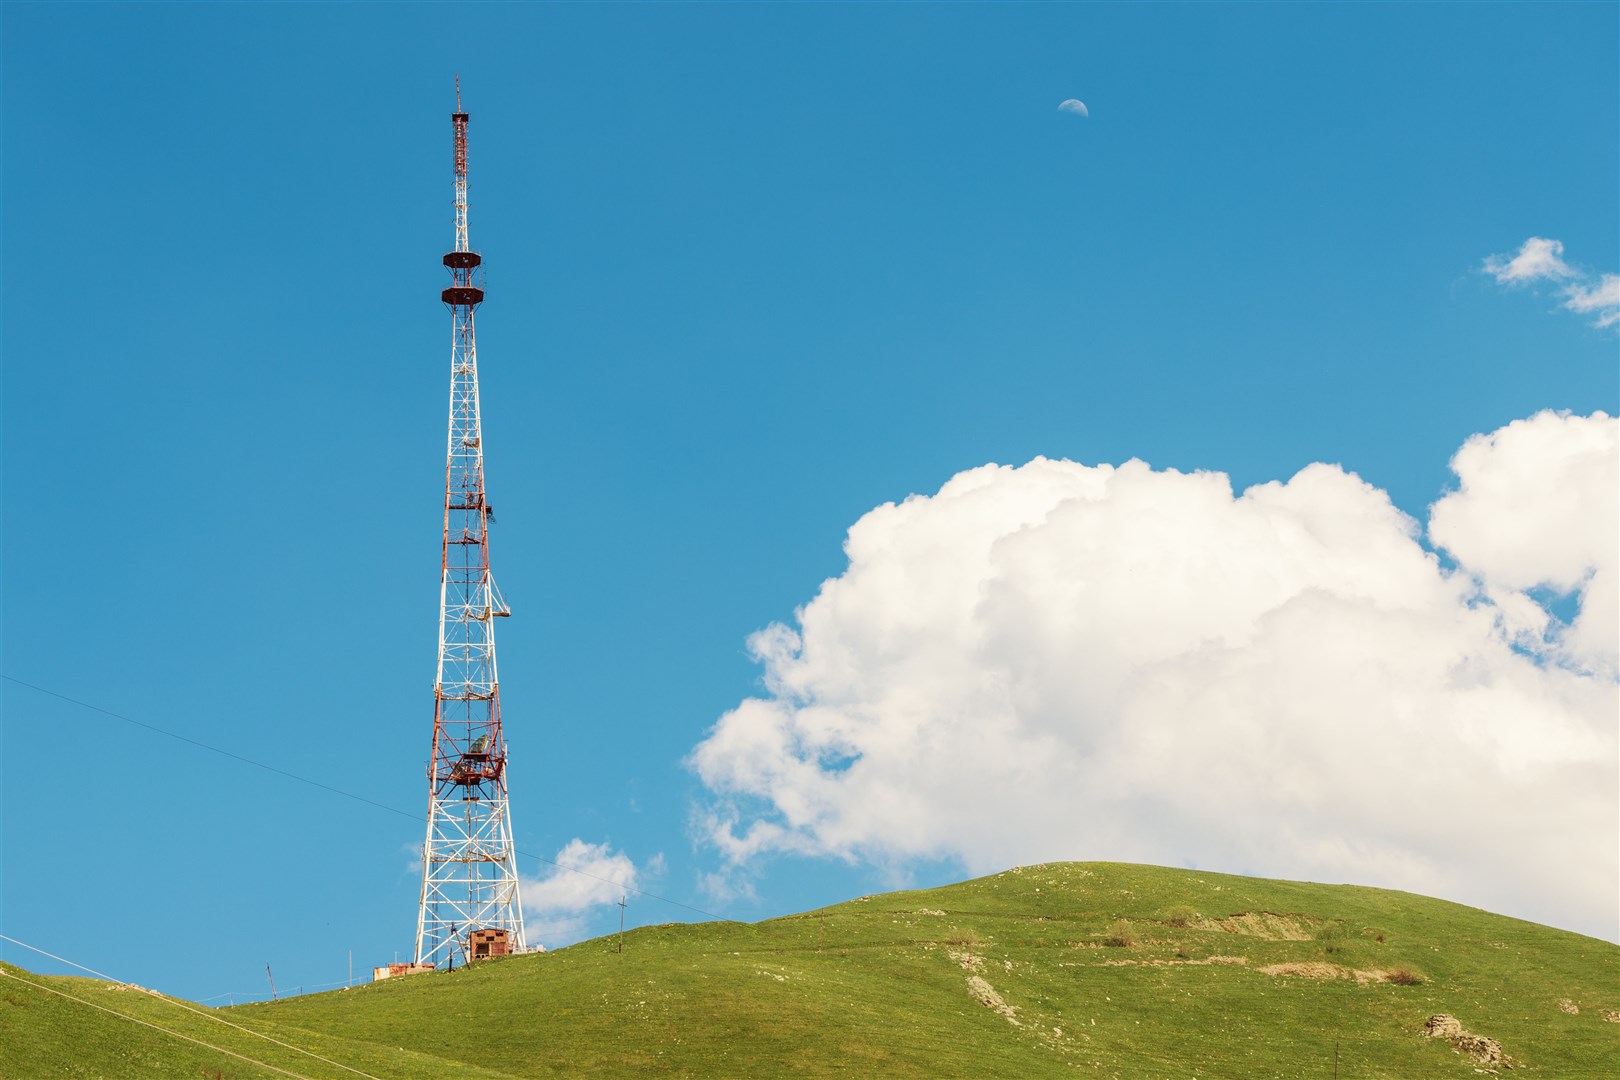 A cellular tower for communication on a hill in a rural area.